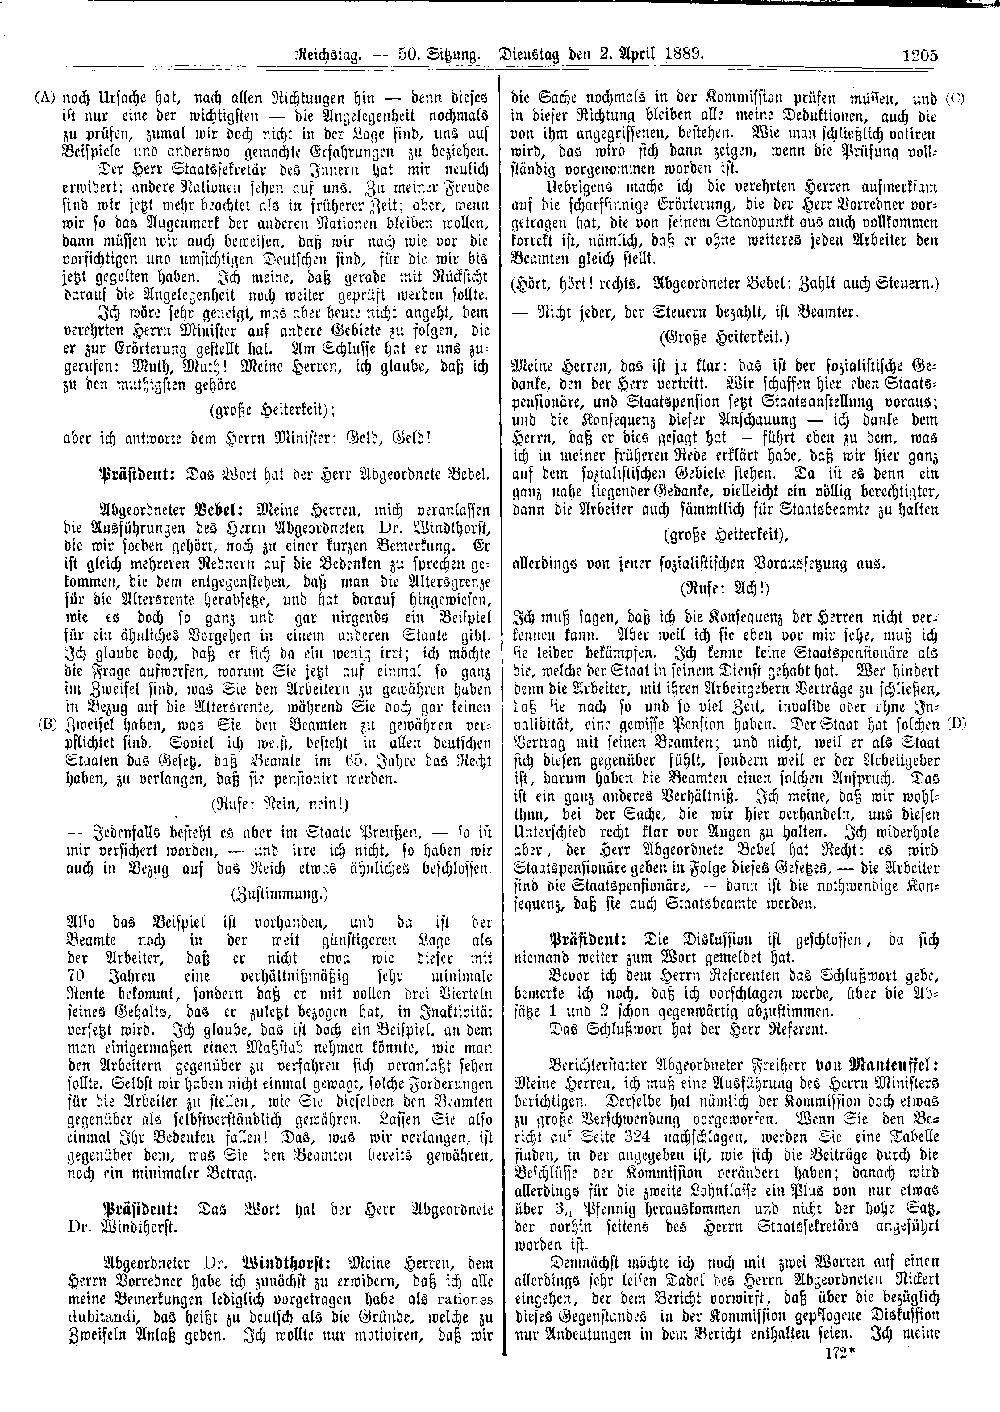 Scan of page 1205